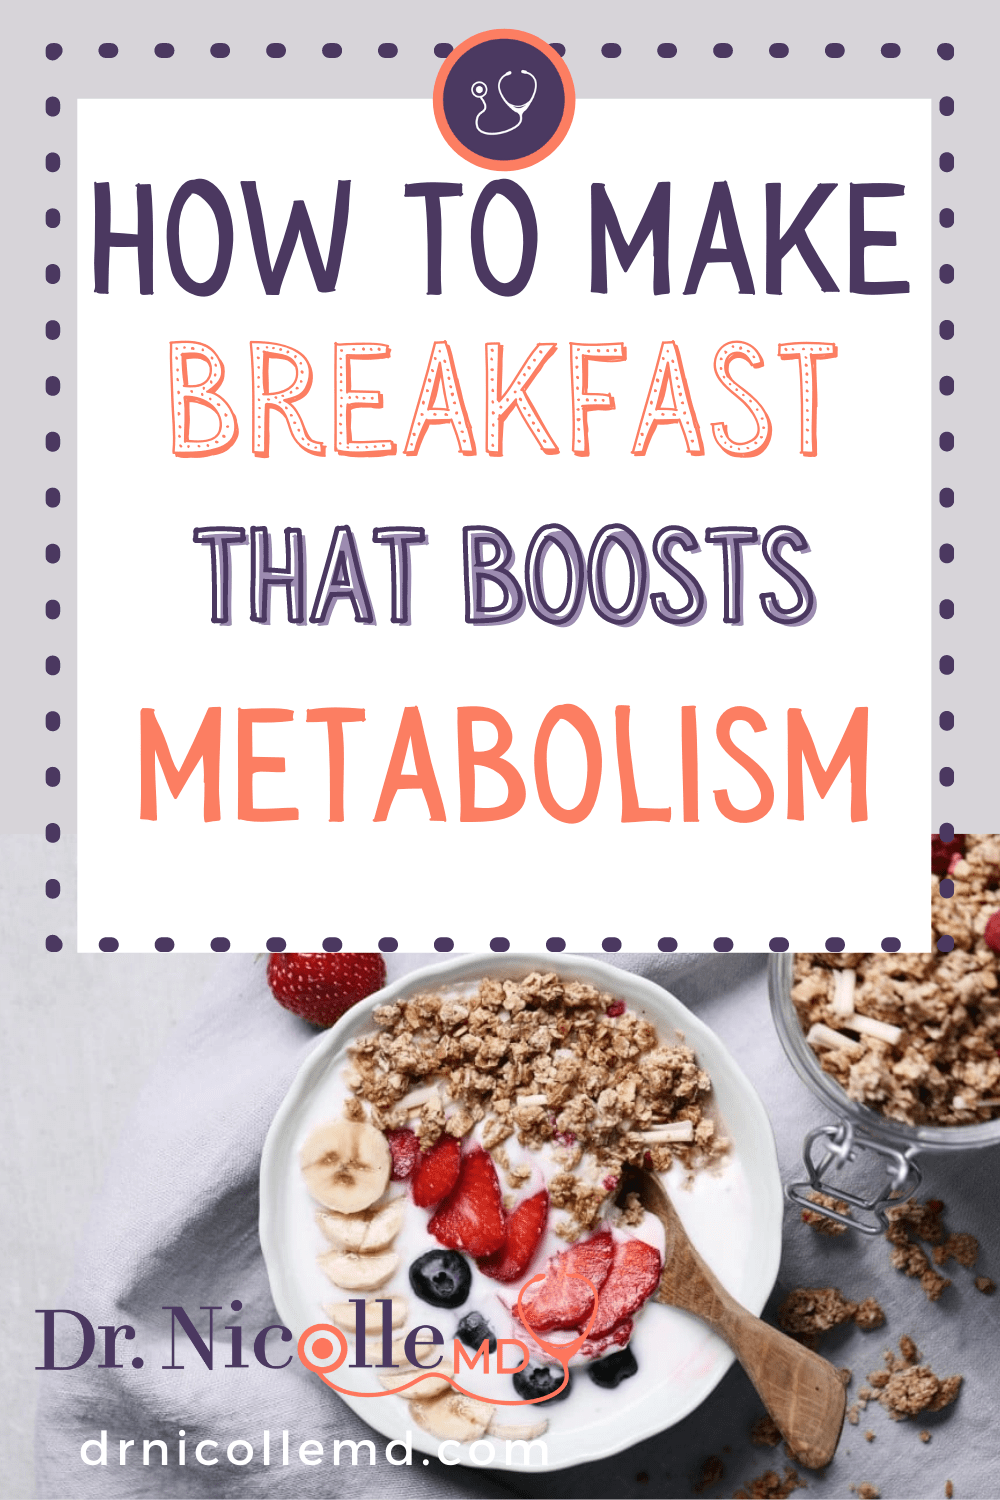 How to Make a Breakfast That Boosts Metabolism